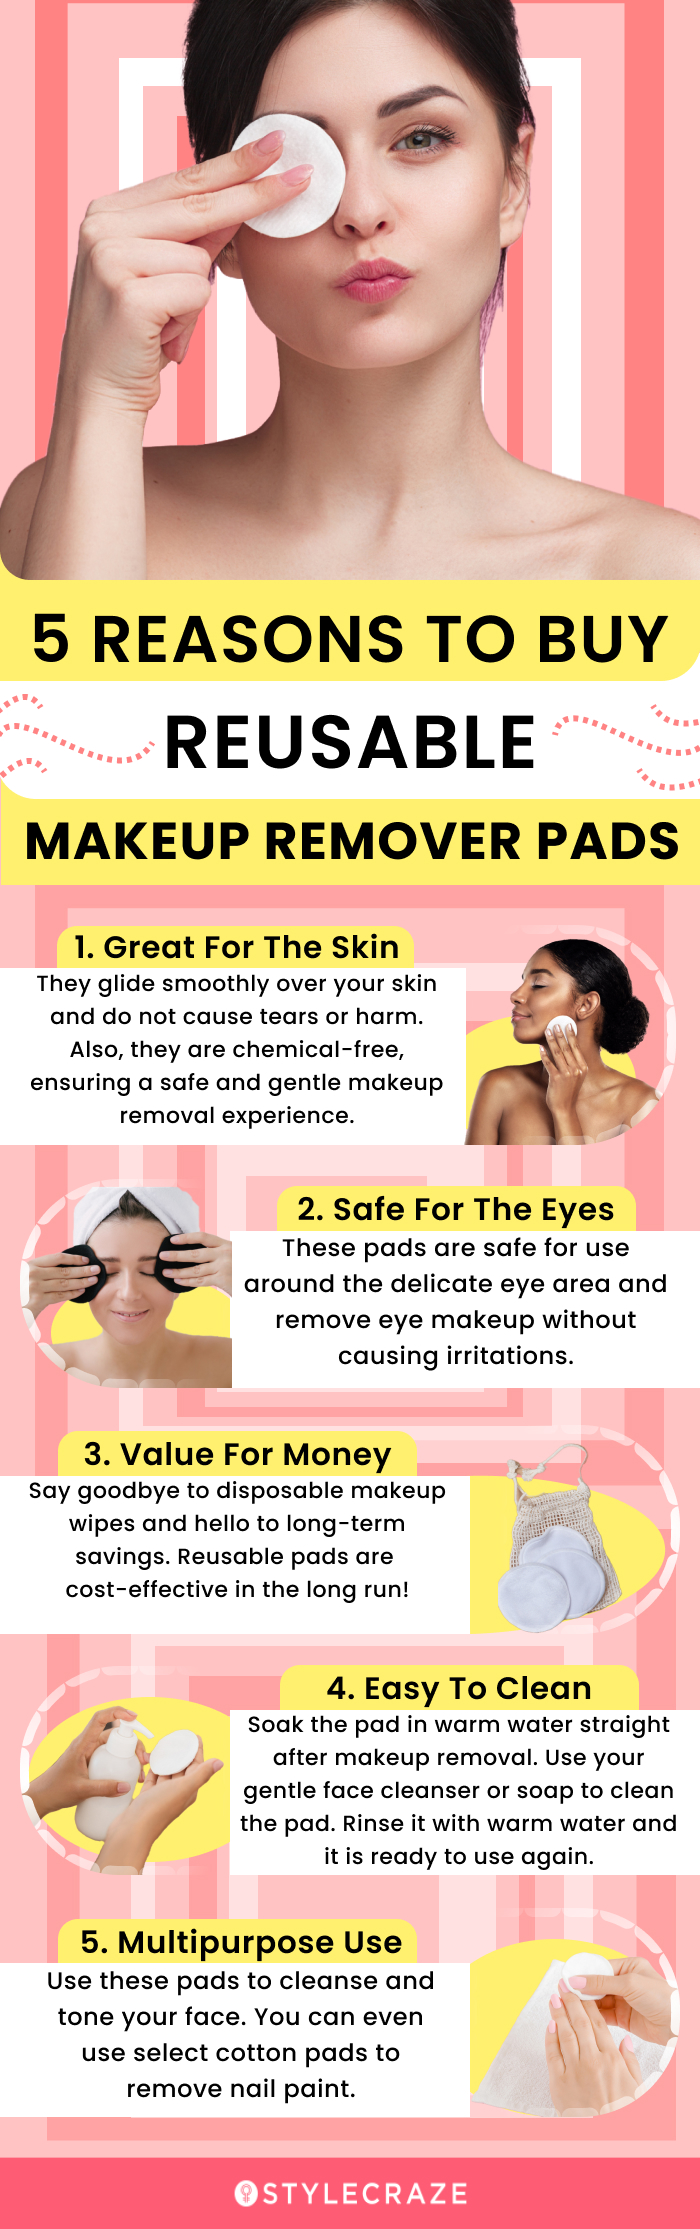 5 Reasons To Buy Reusable Makeup Remover Pads (infographic)